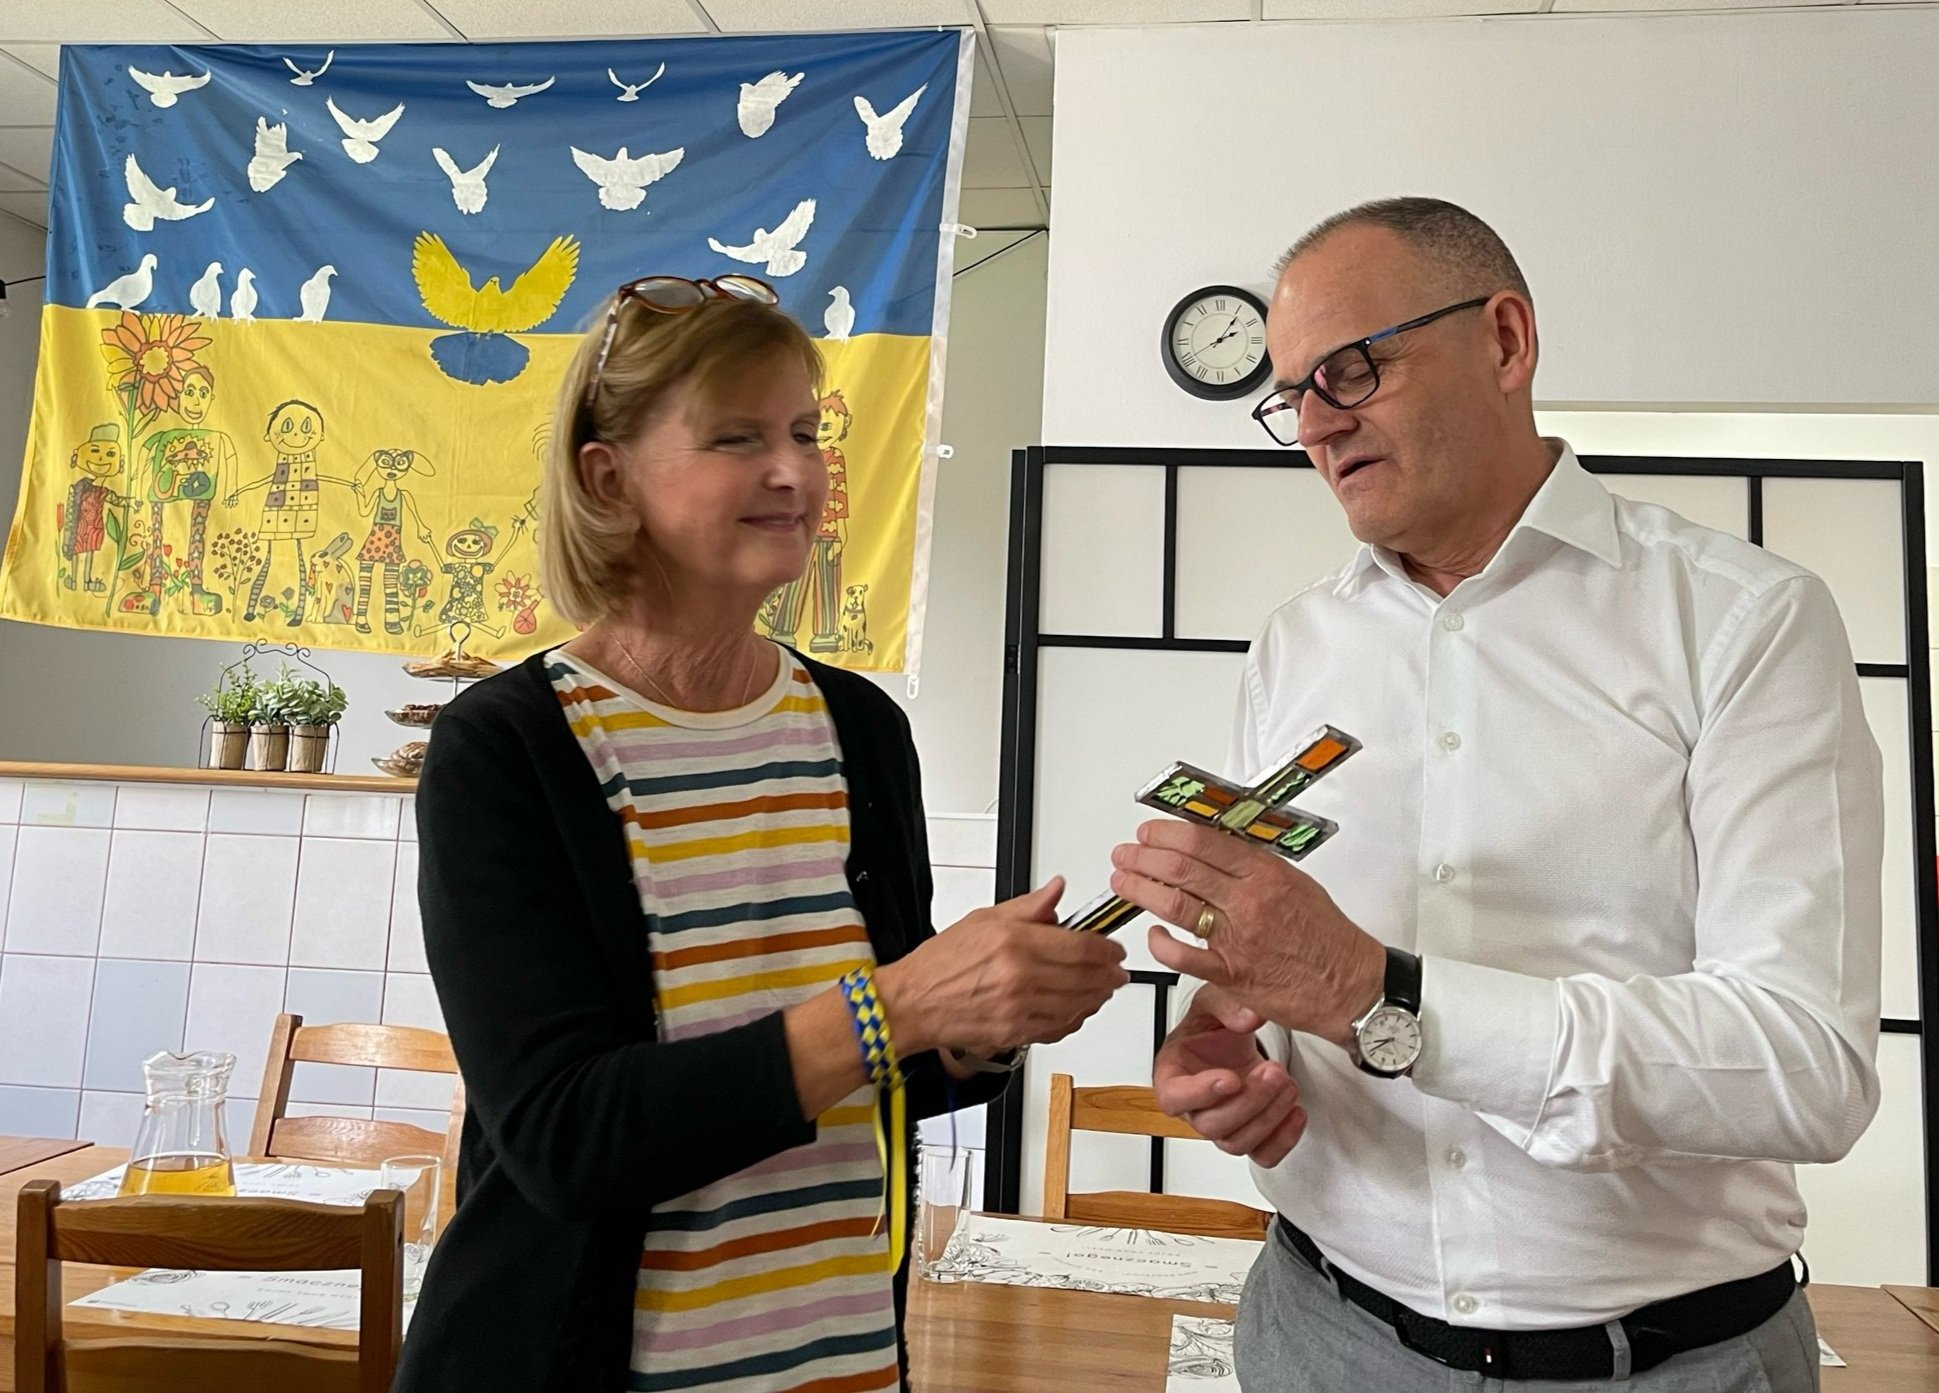   Jill Gilbert of First Presbyterian Columbus presents a glass cross as a gift to Piotr Nowak, president of WSTS. This glass cross was made from stained glass burned in a church and she said, “We remember that from things that were broken and ruined,